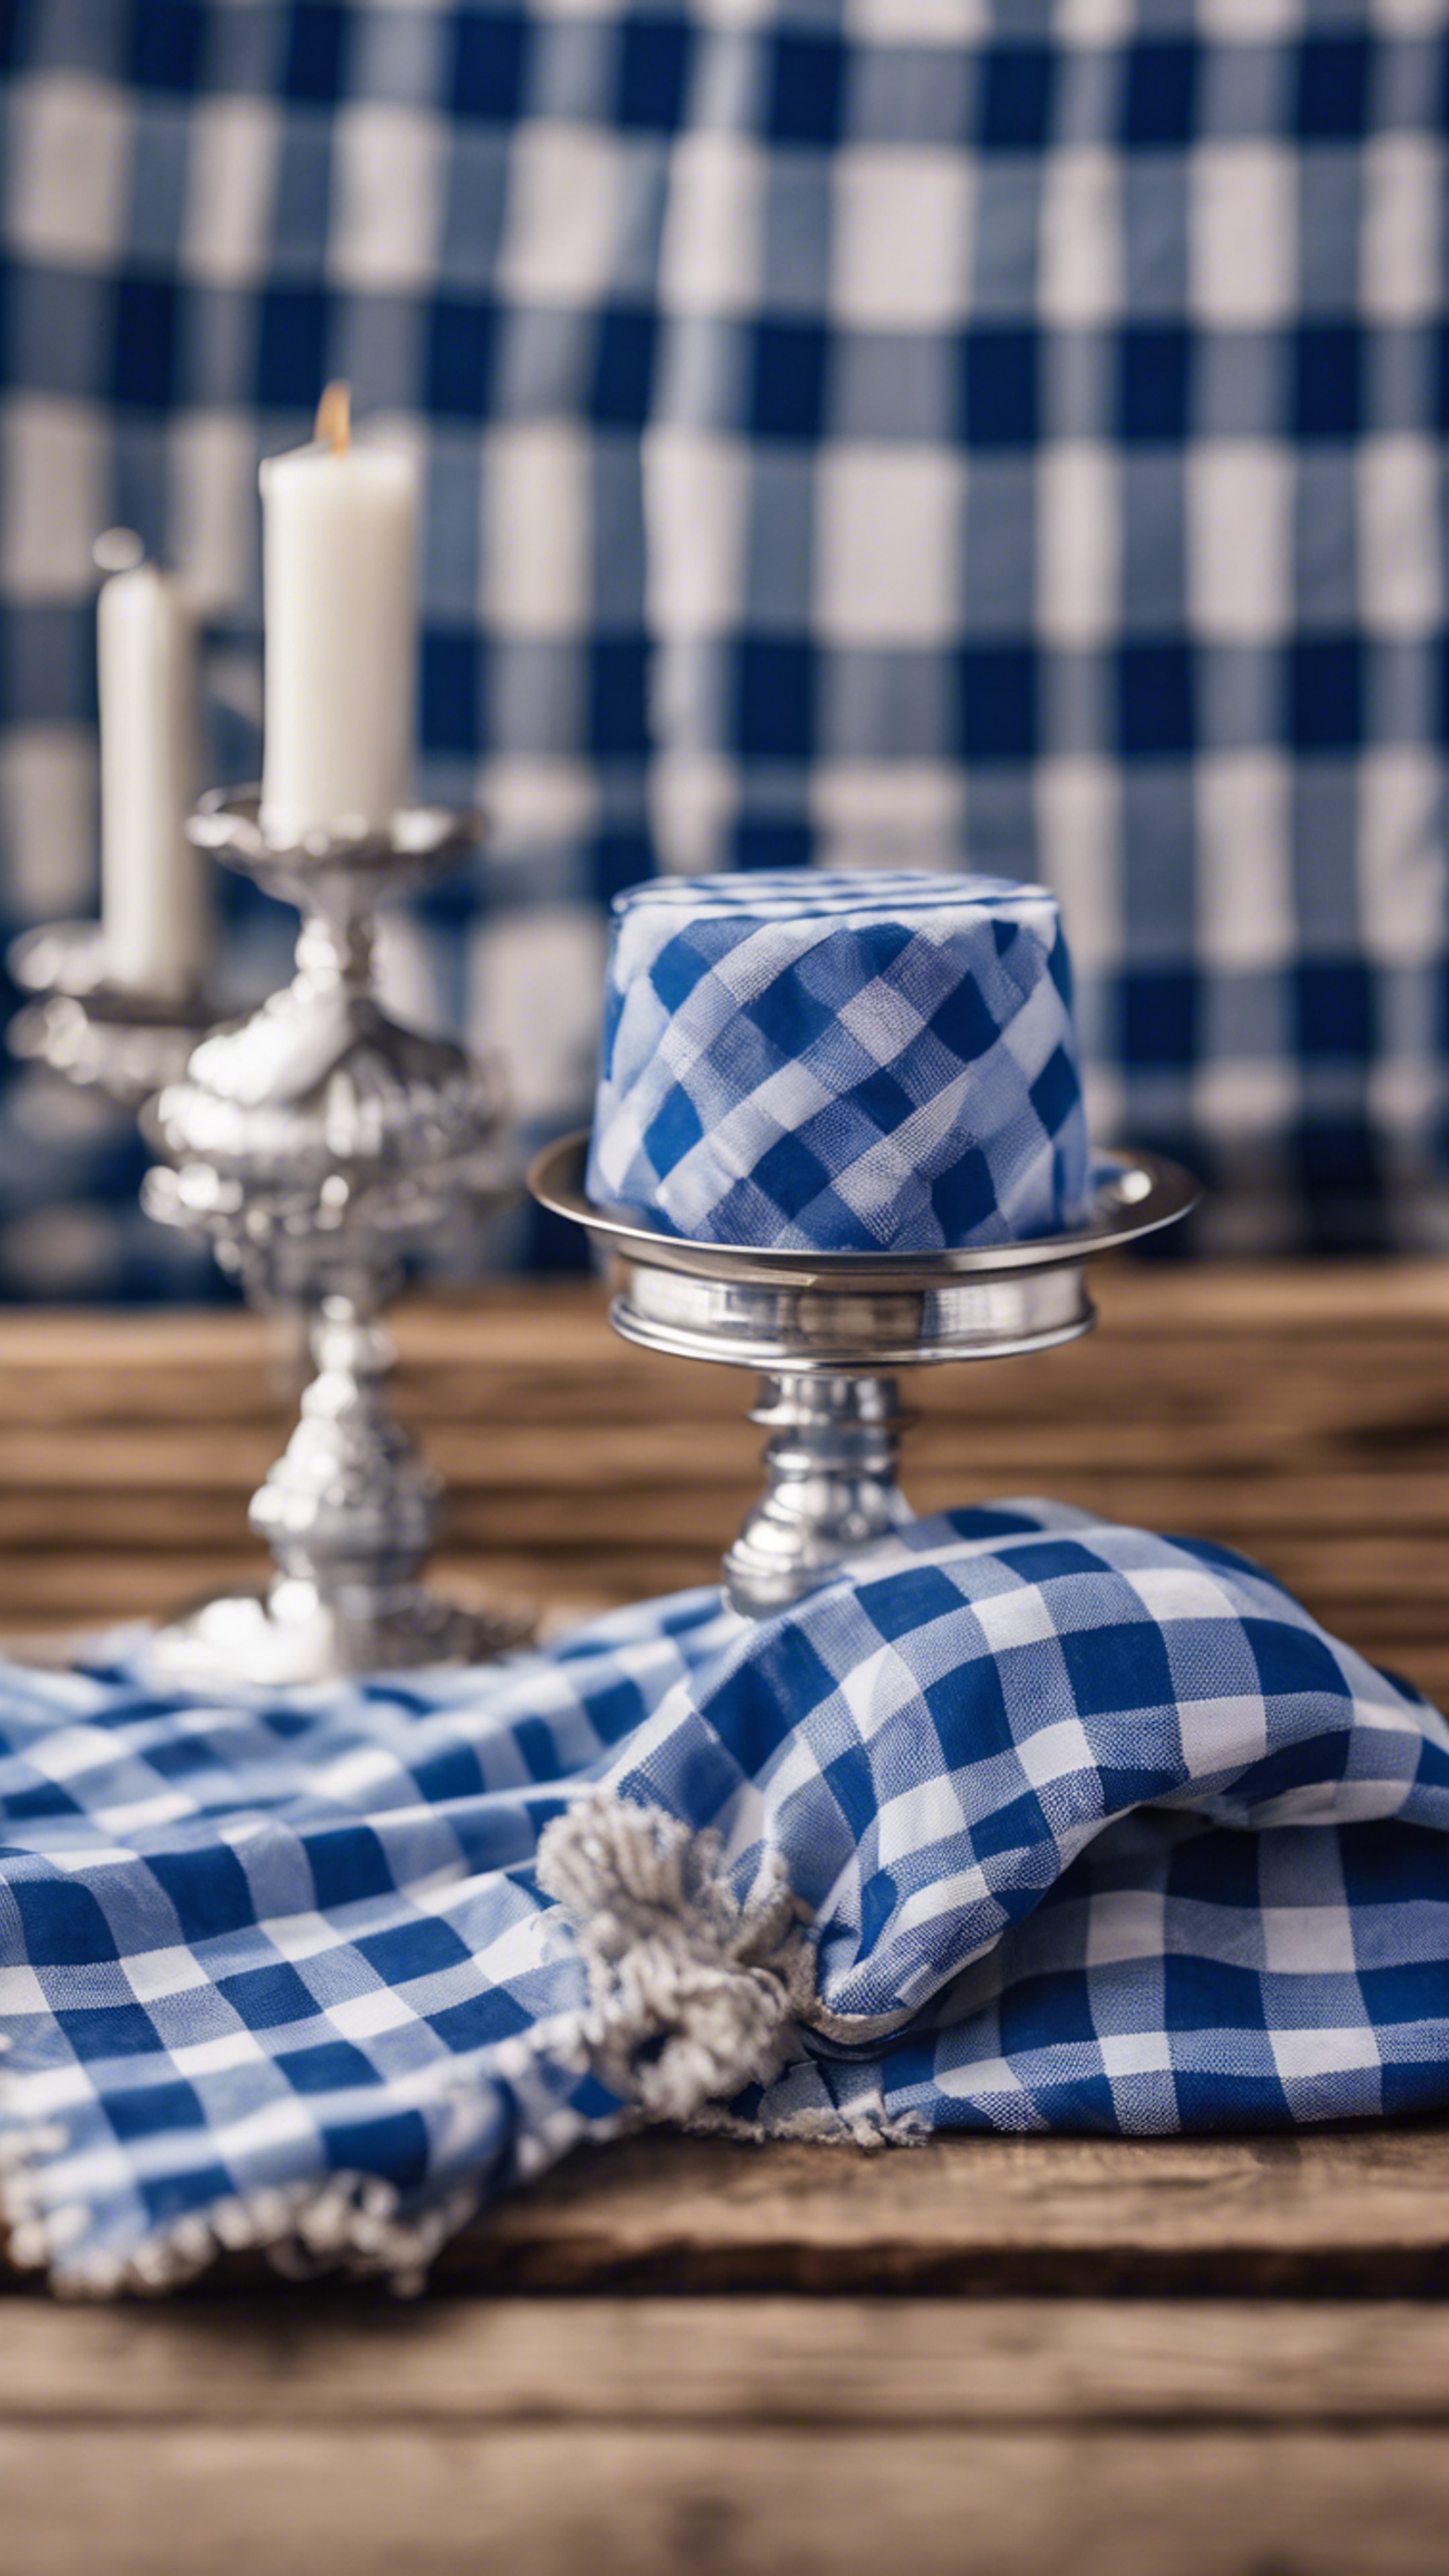 Classic blue checkered gingham fabric draped over a wooden table with a silver candelabra, evoking a preppy picnic scene. Fond d'écran[5483729deeeb4e2a9f91]